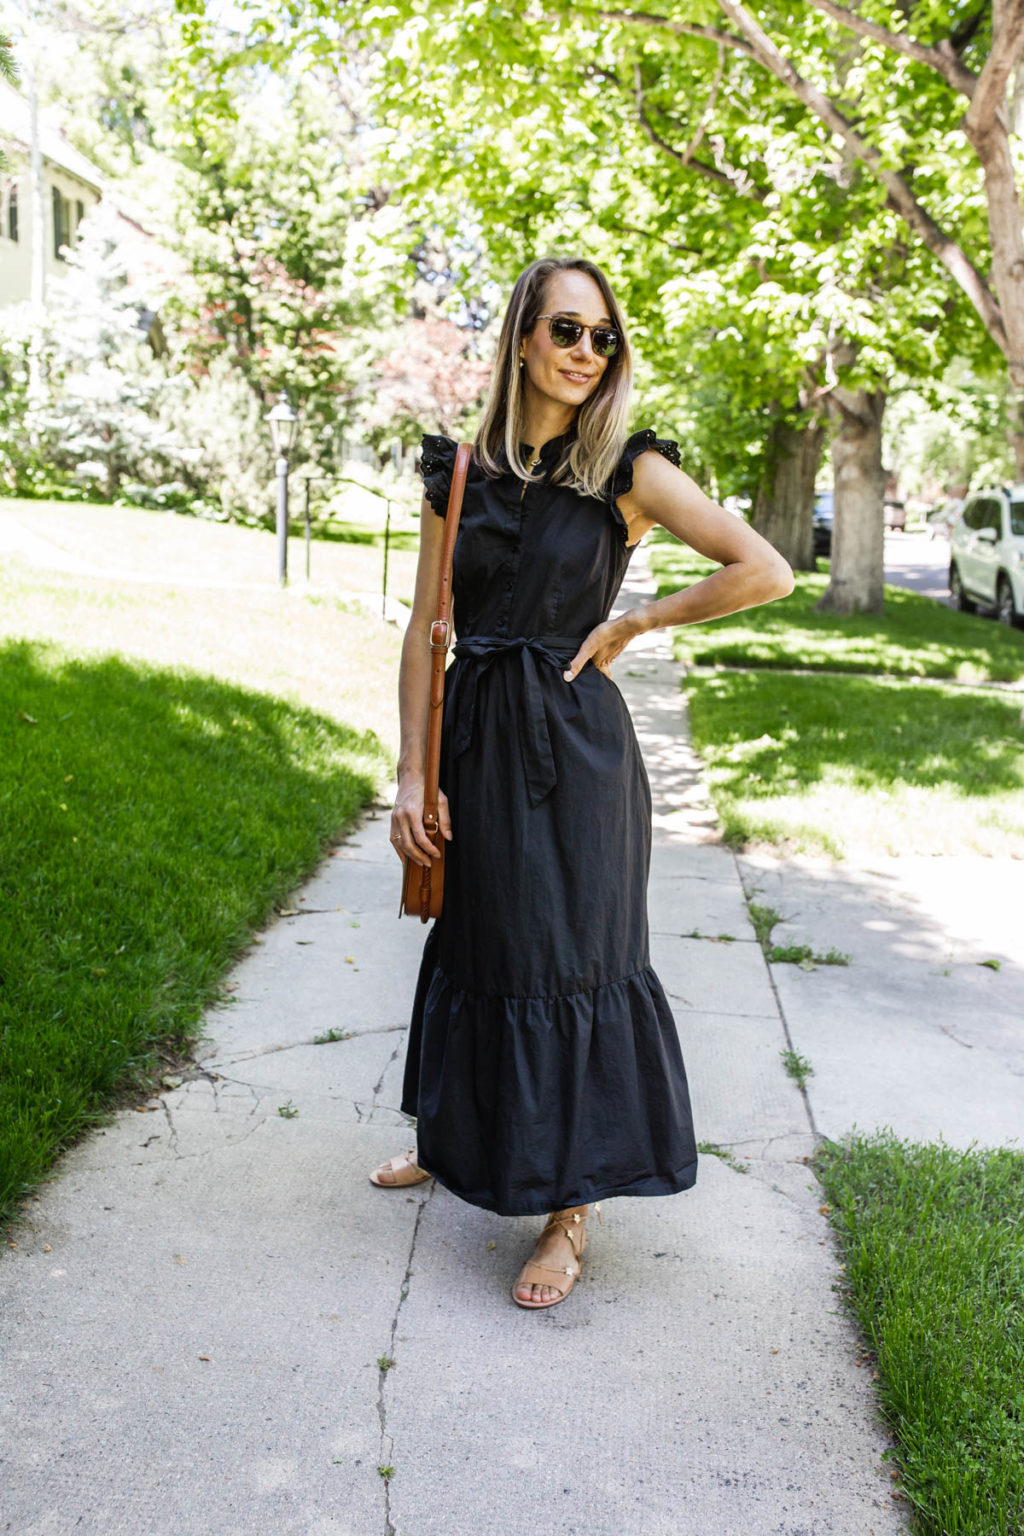 My Favorite $40 Dresses for Summer - Style